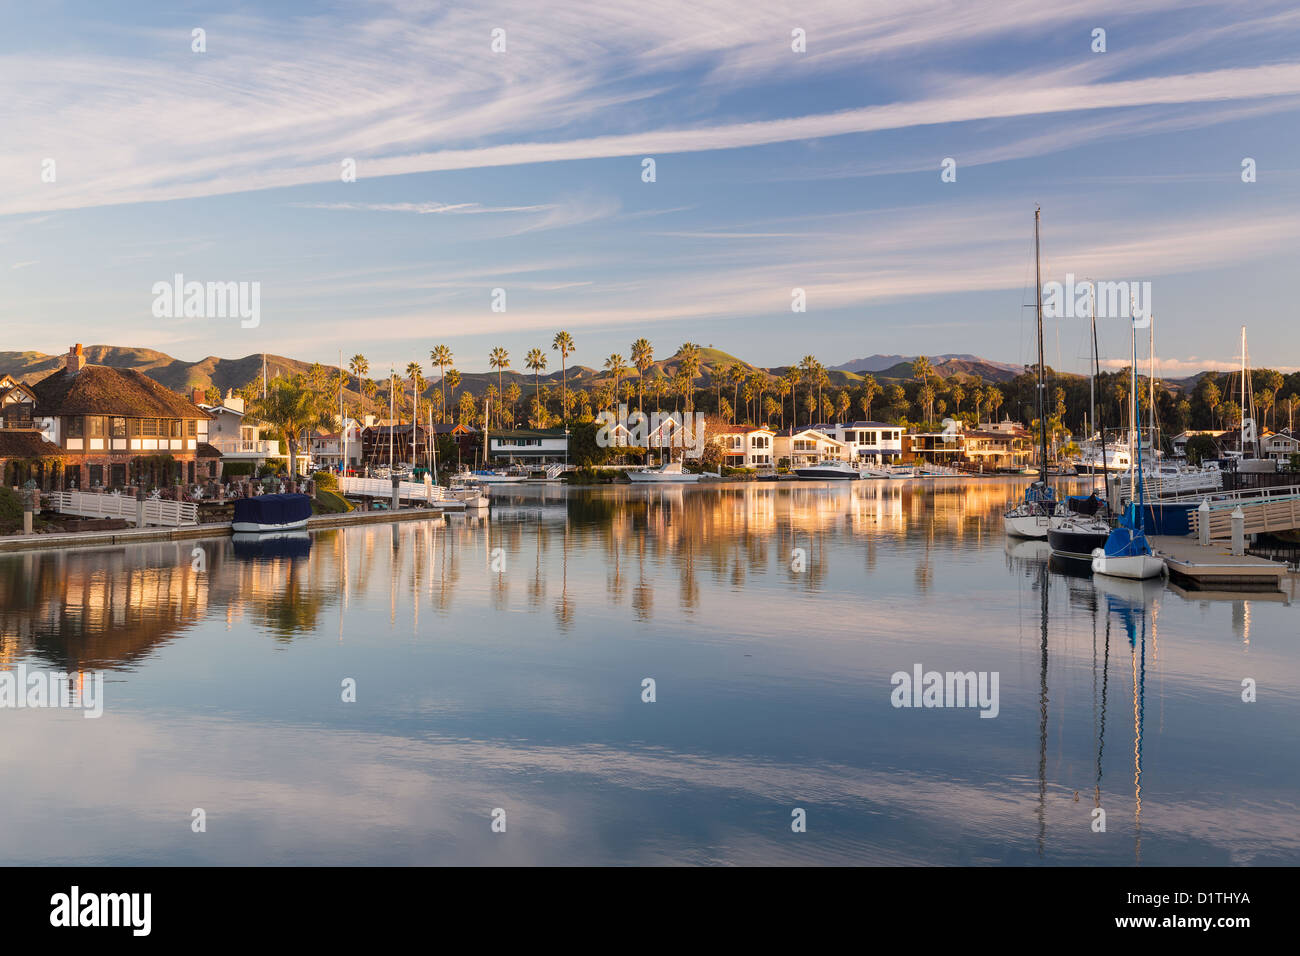 Sunrise at residential development by water in Ventura, California with modern homes and yachts boats Stock Photo